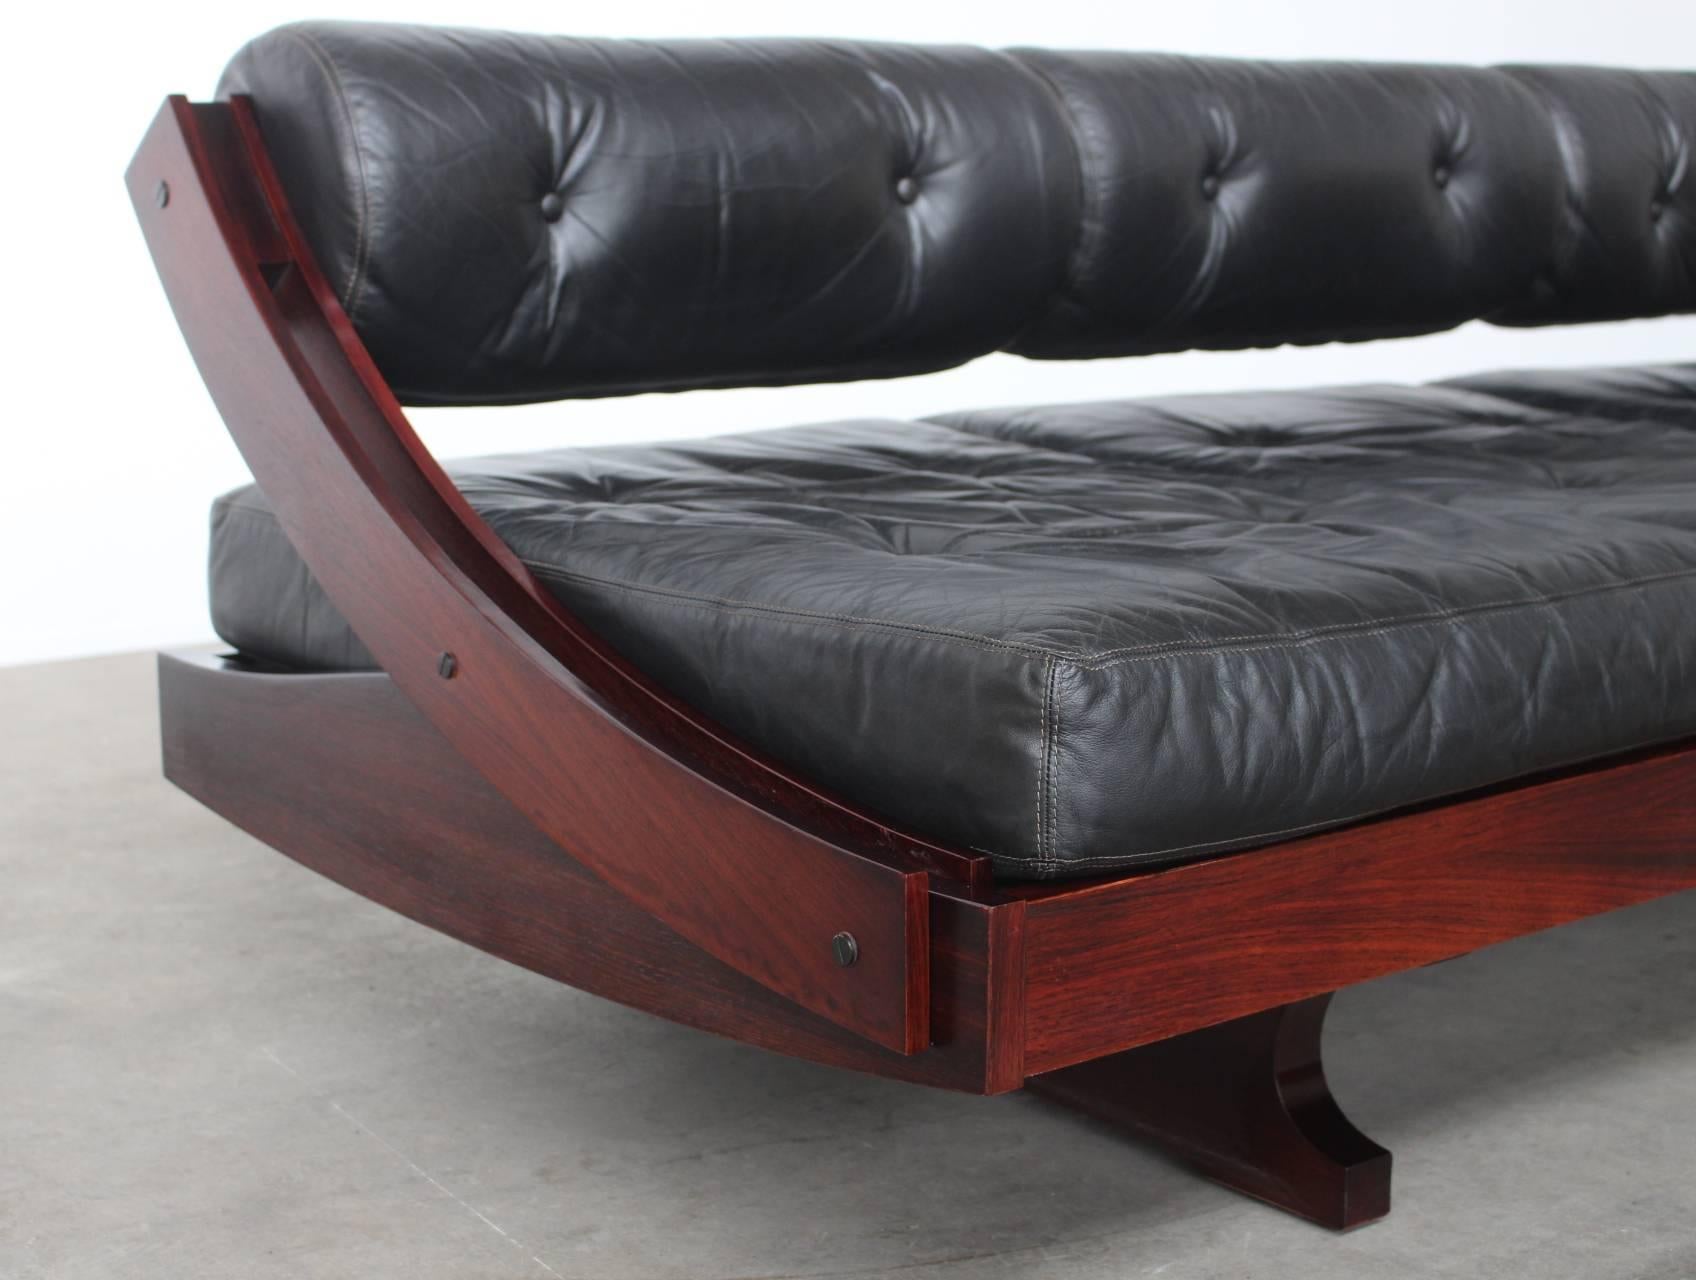 Rare multifunctional sofa model GS-195 designed in 1963 by Gianni Songia and manufactured by Sormani in Arosio, Italy. The sofa has a Brazilian rosewood frame that holds three tufted black leather cushions in perfect condition. The backrest slides